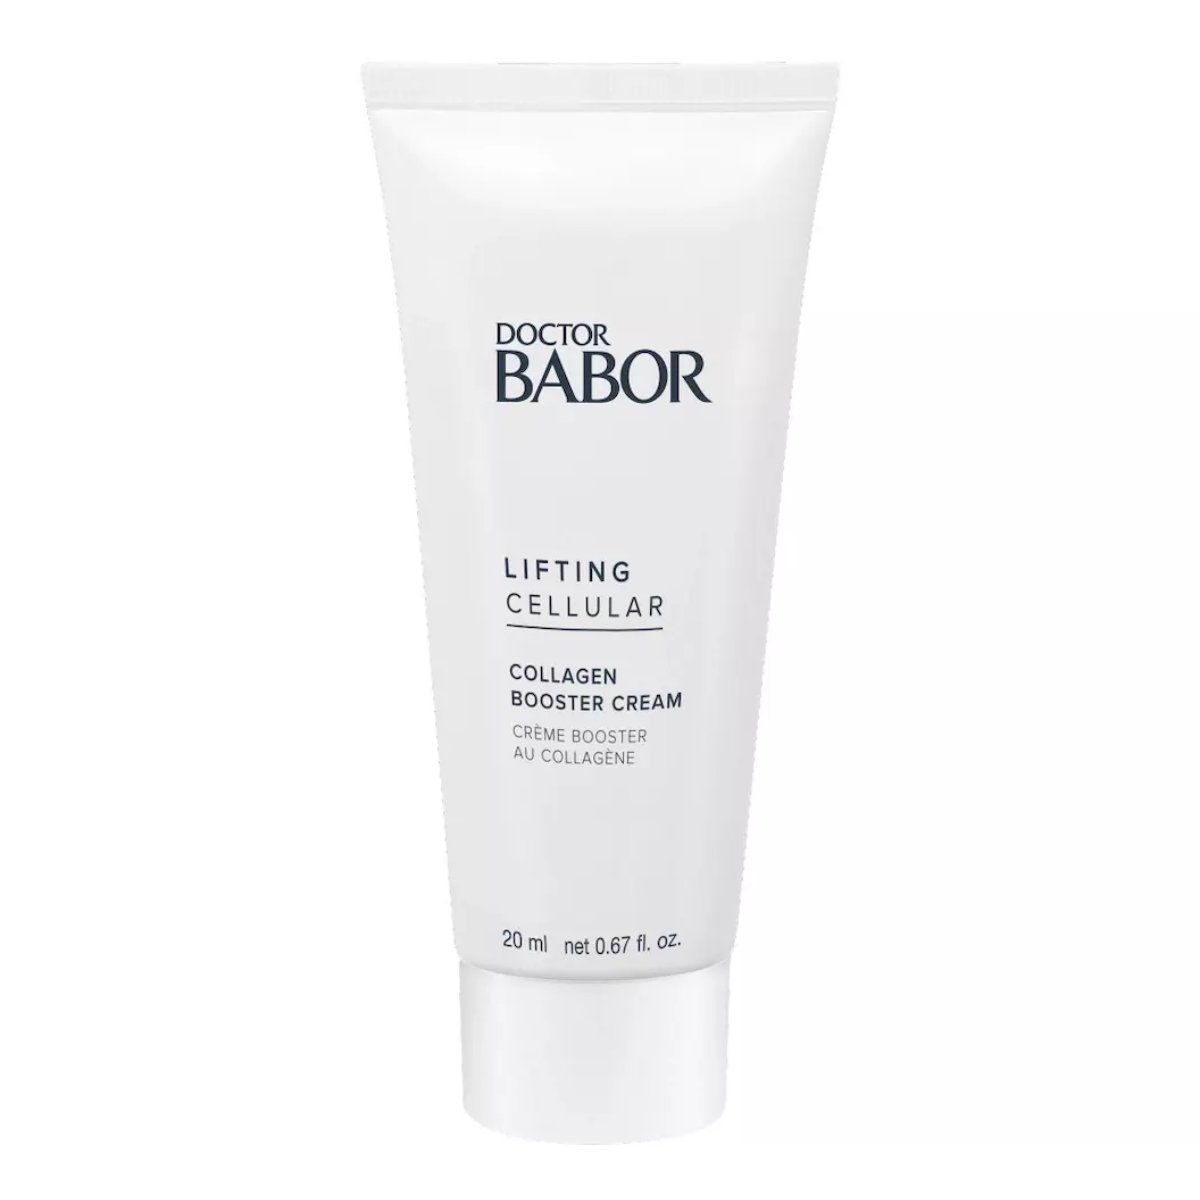 Doctor Babor Lifting Cellular Collagen Booster Cream 20ml